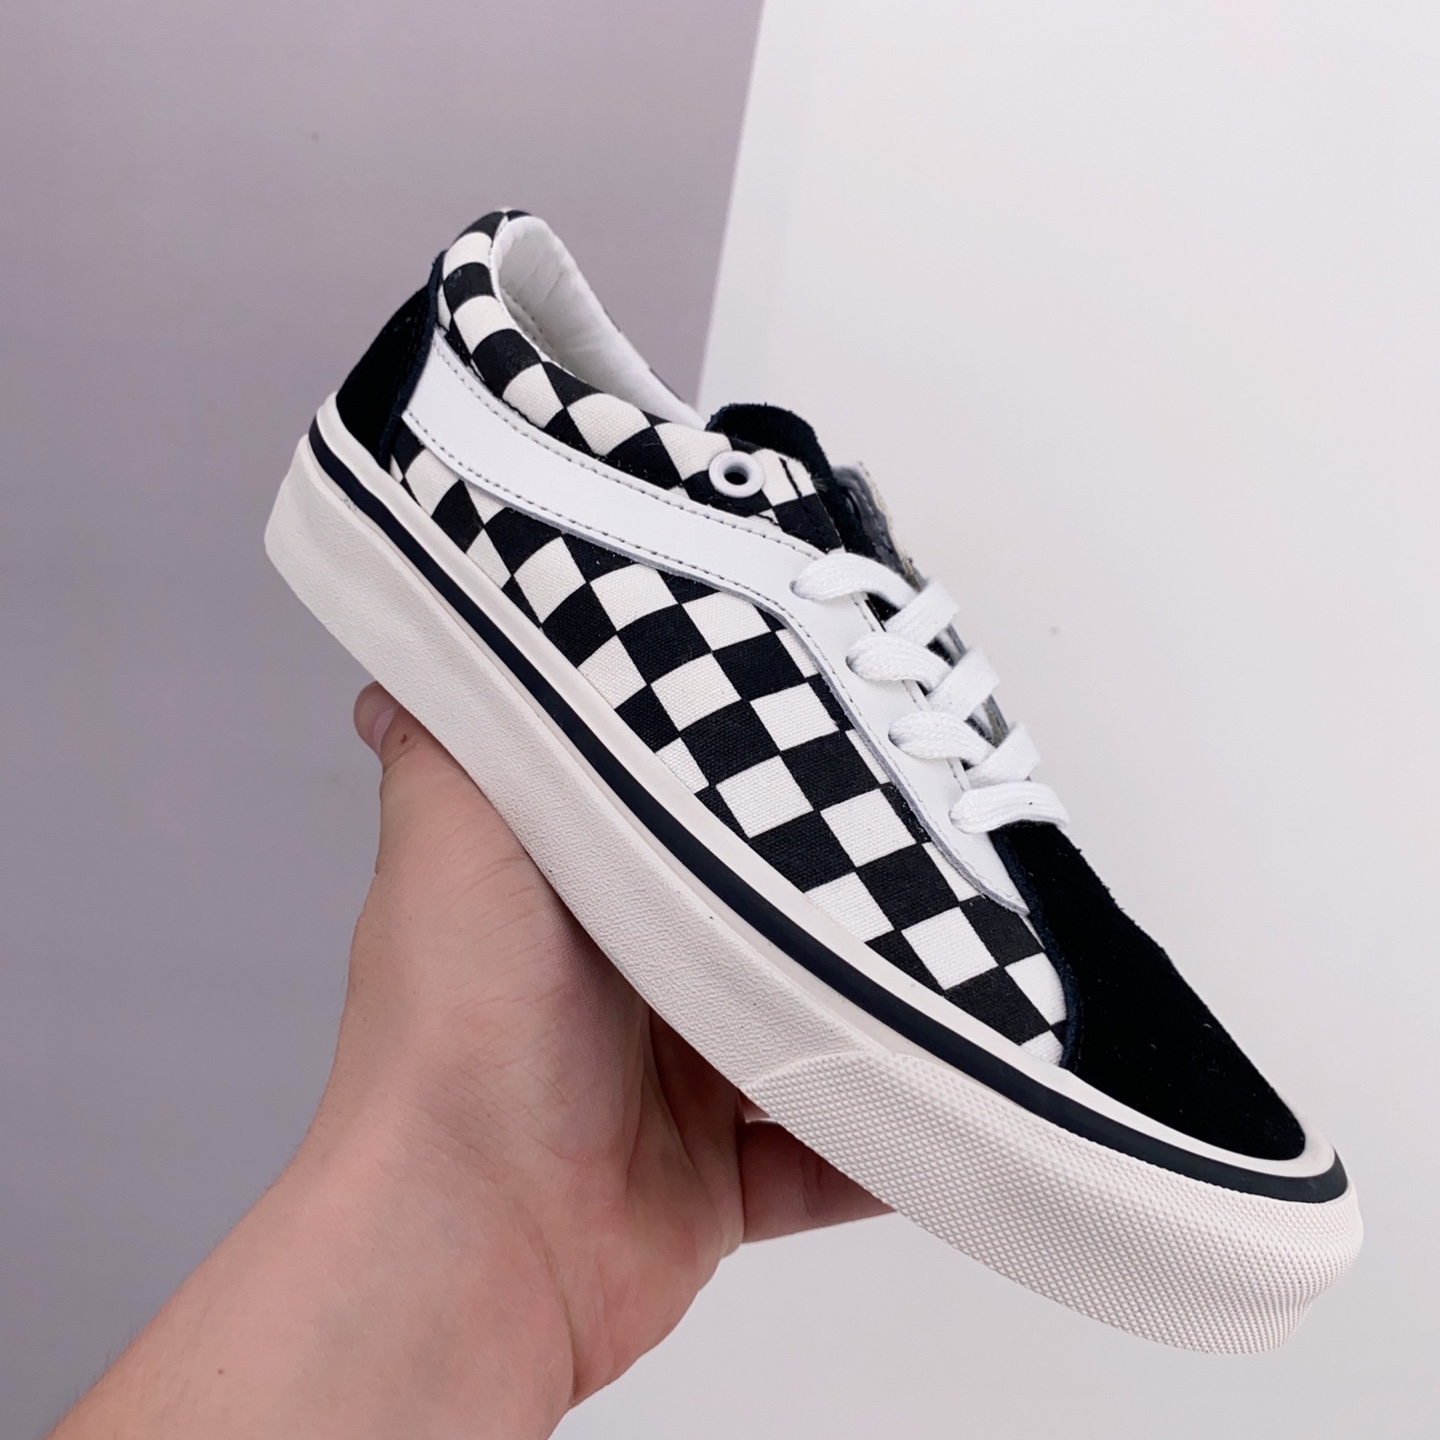 Vans Bold Ni Checkerboard Black Marshmallow VN0A3WLPR6R – Stylish Sneakers for a Modern Look